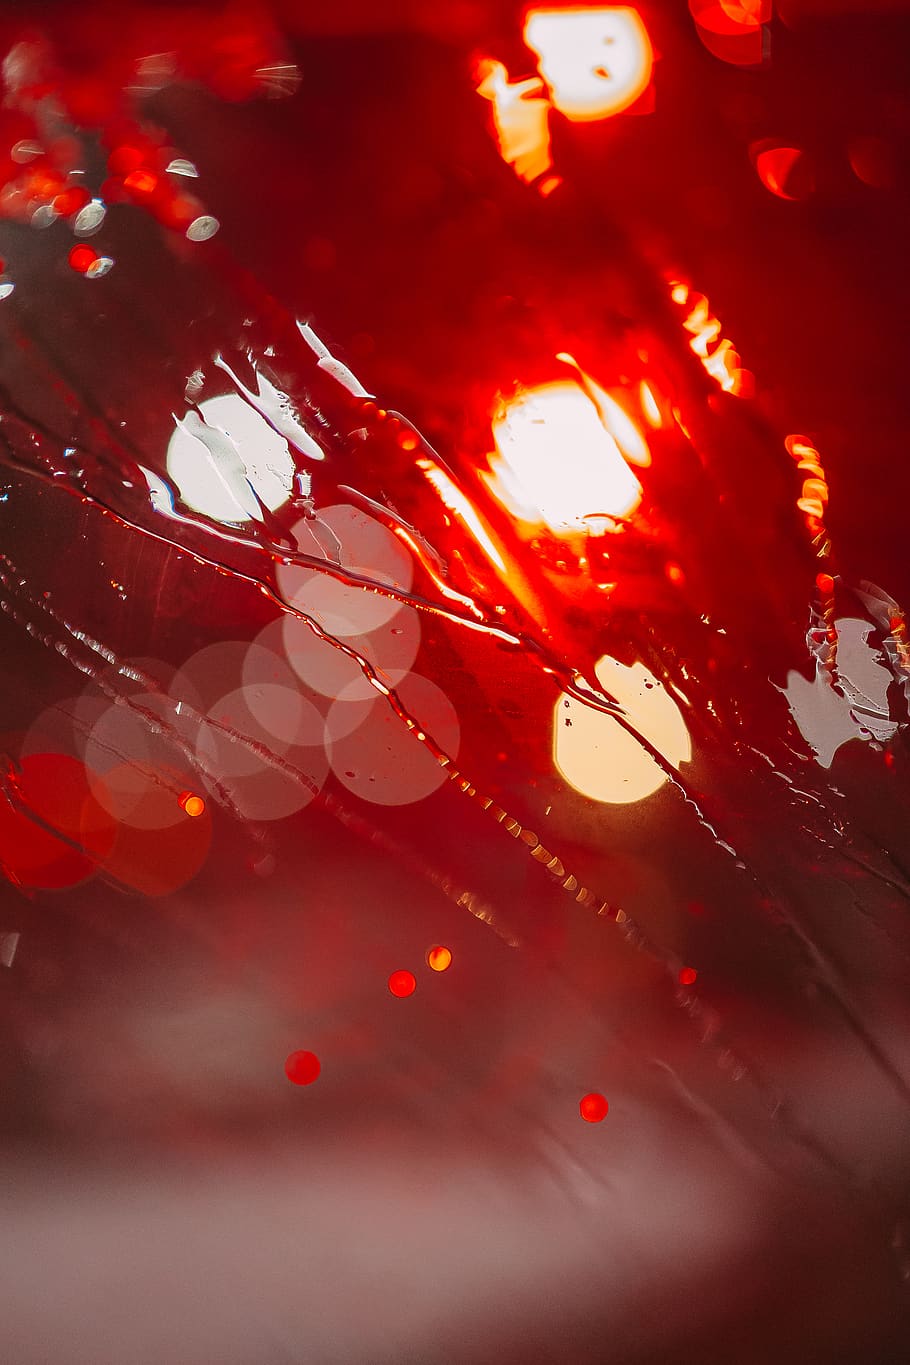 HD wallpaper: rain on the window, background, red light, blur, close-up, no  people | Wallpaper Flare